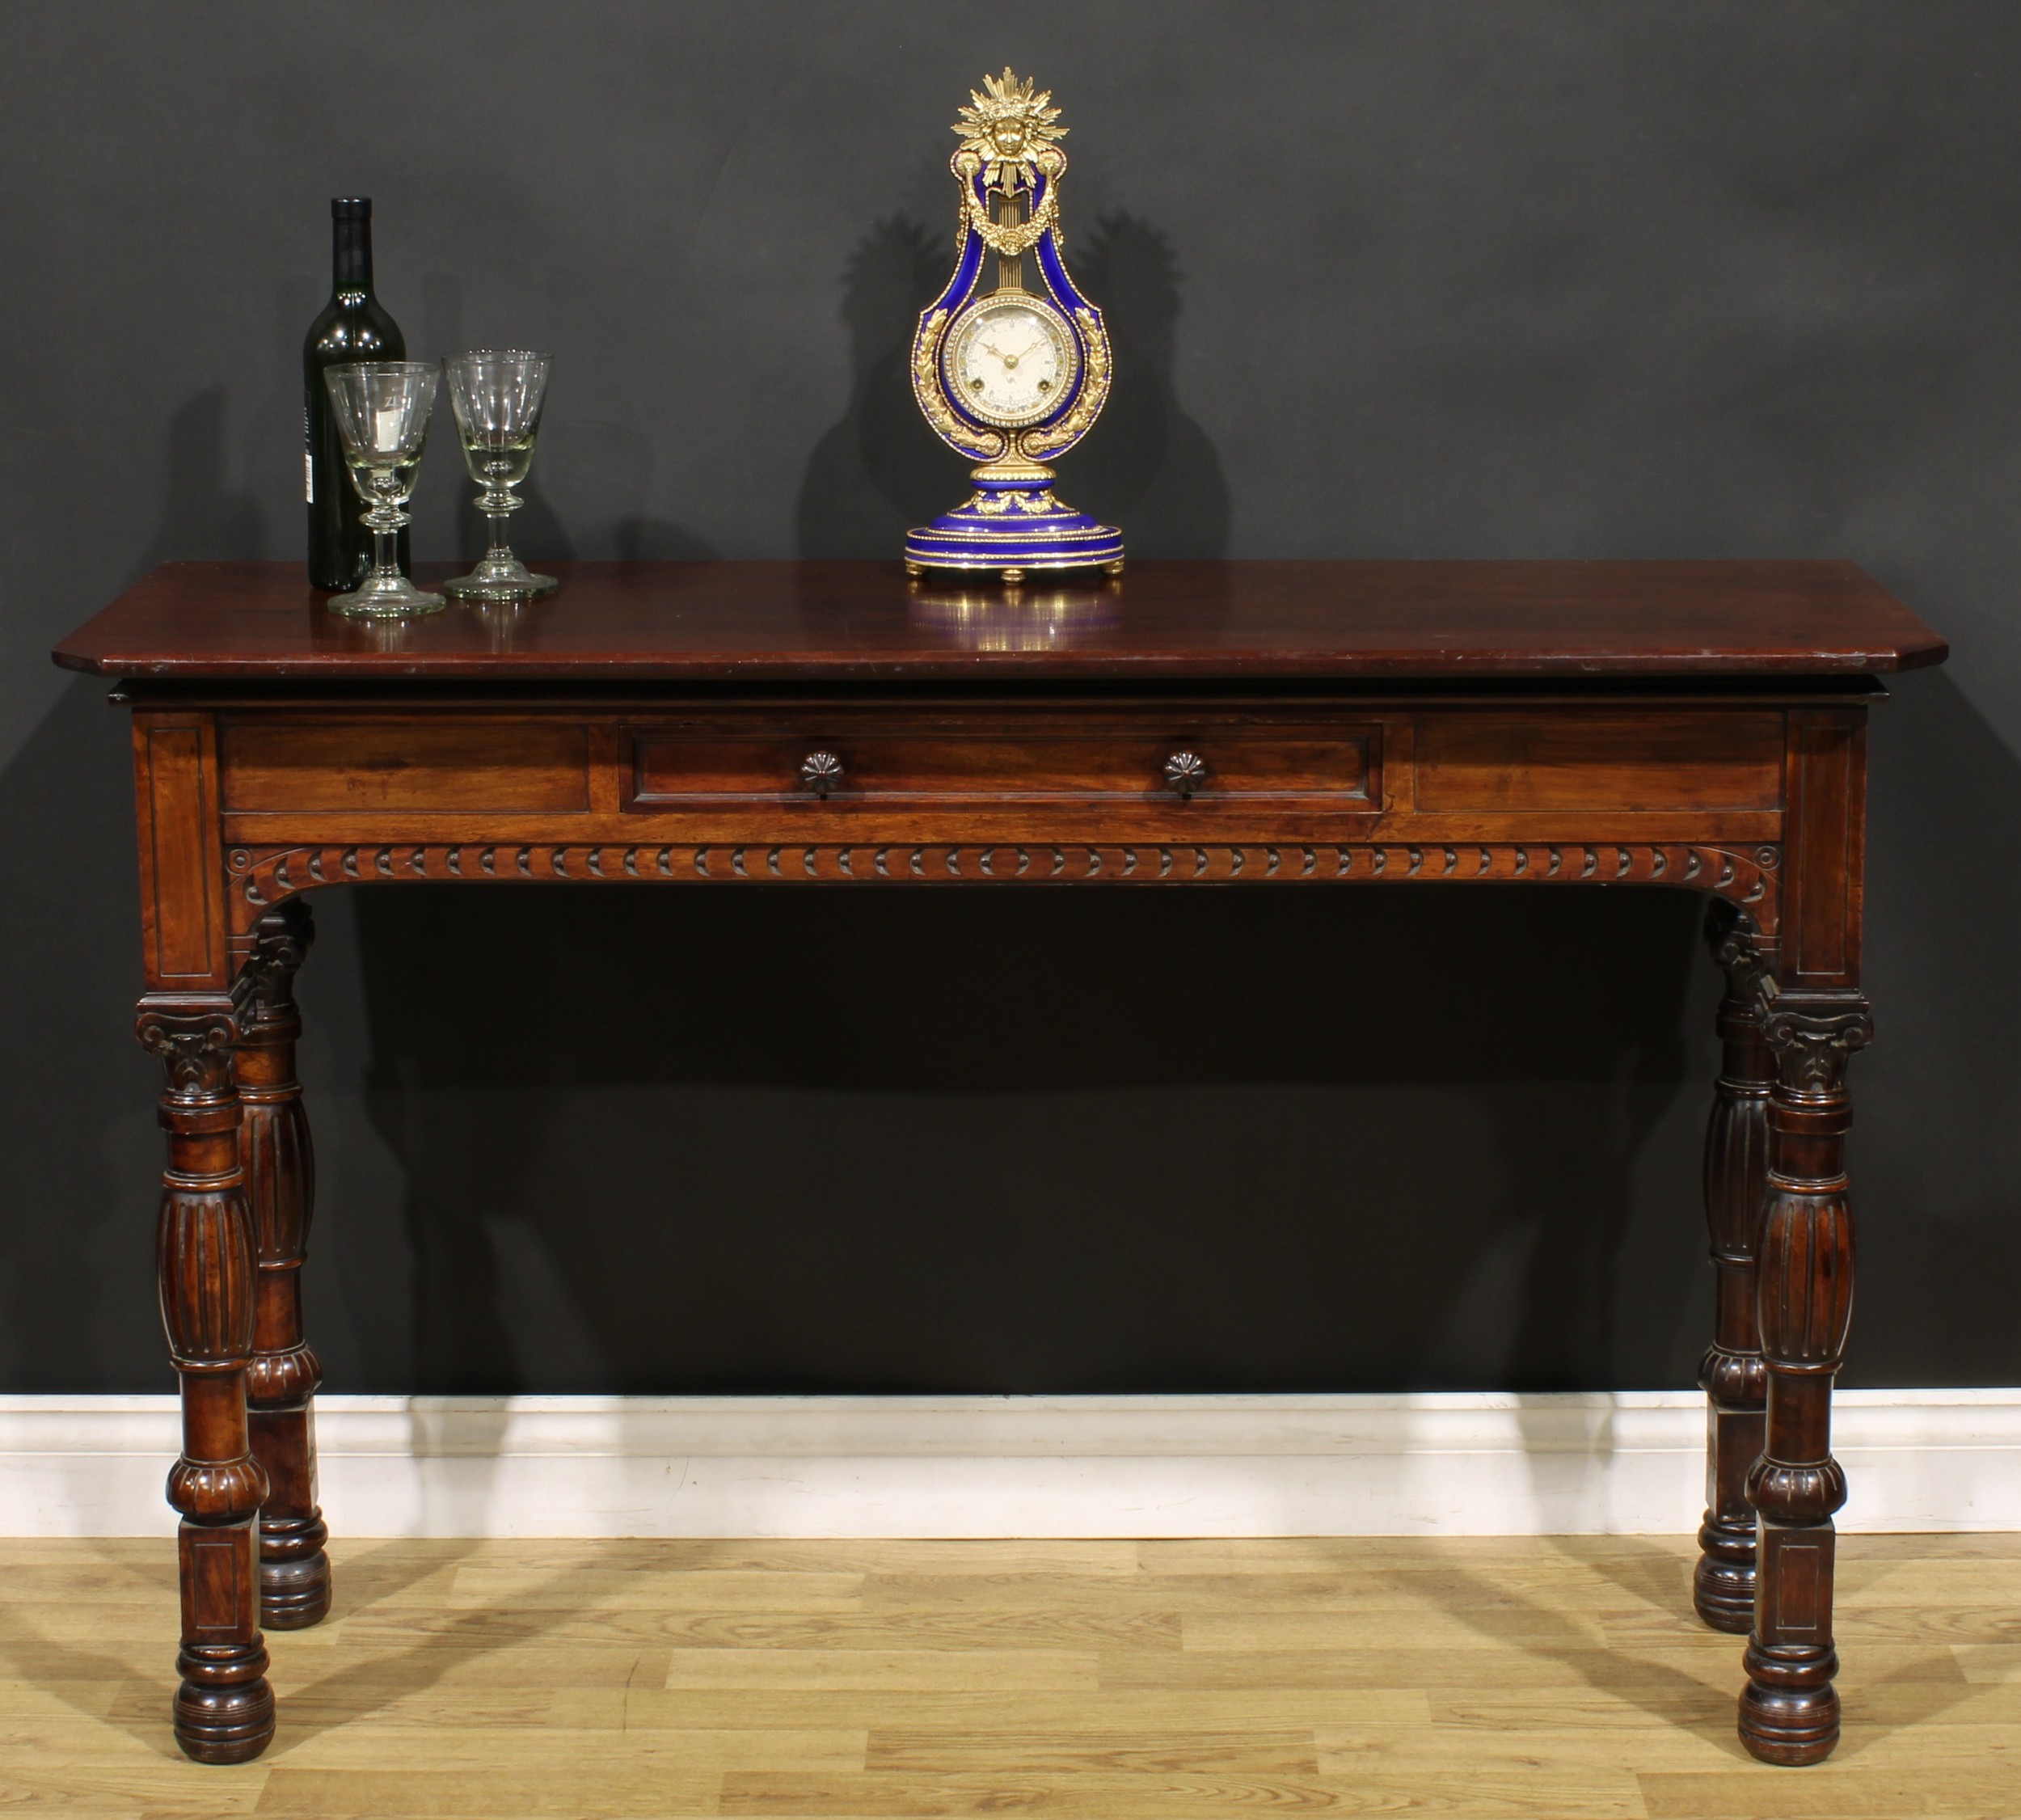 A Victorian mahogany pier table, rectangular top with canted foreangles above a single frieze